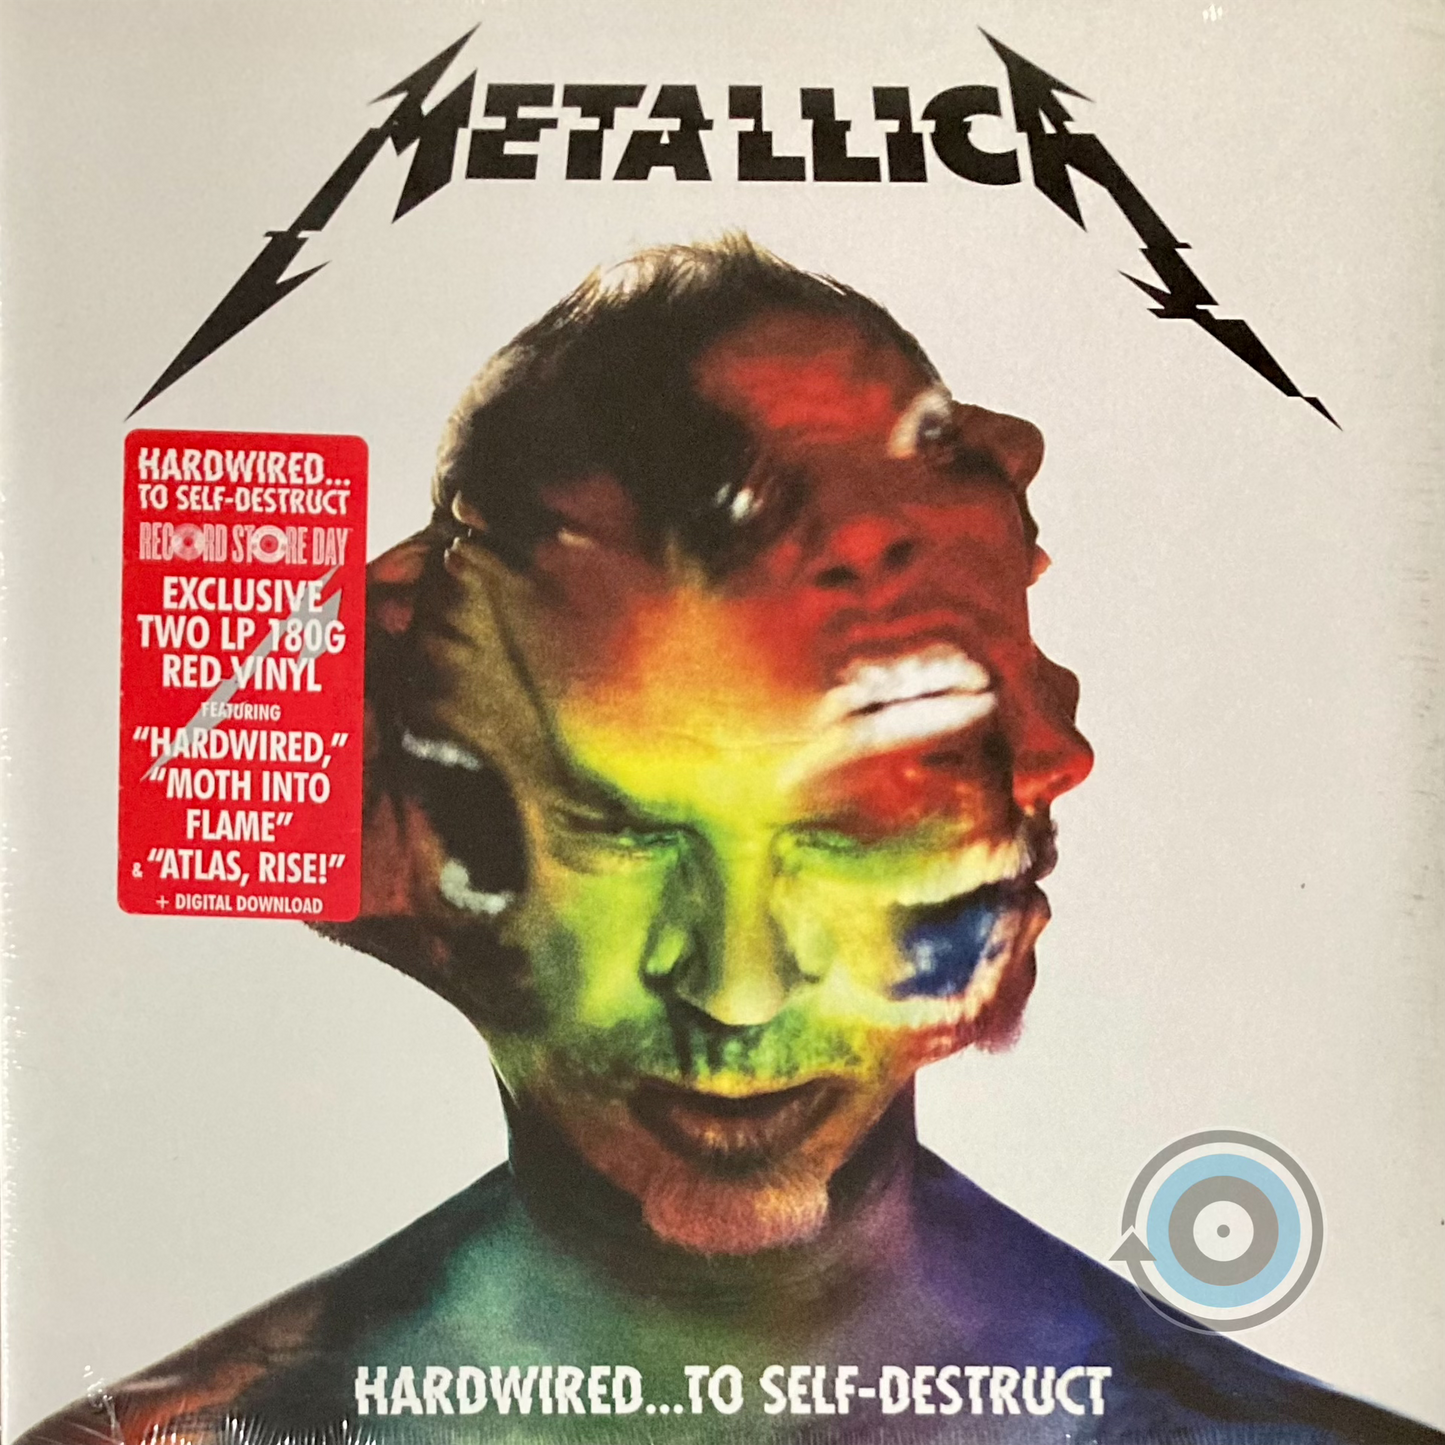 Metallica - Hardwired... To Self-Destruct (Limited Edition) 2-LP (Sealed)